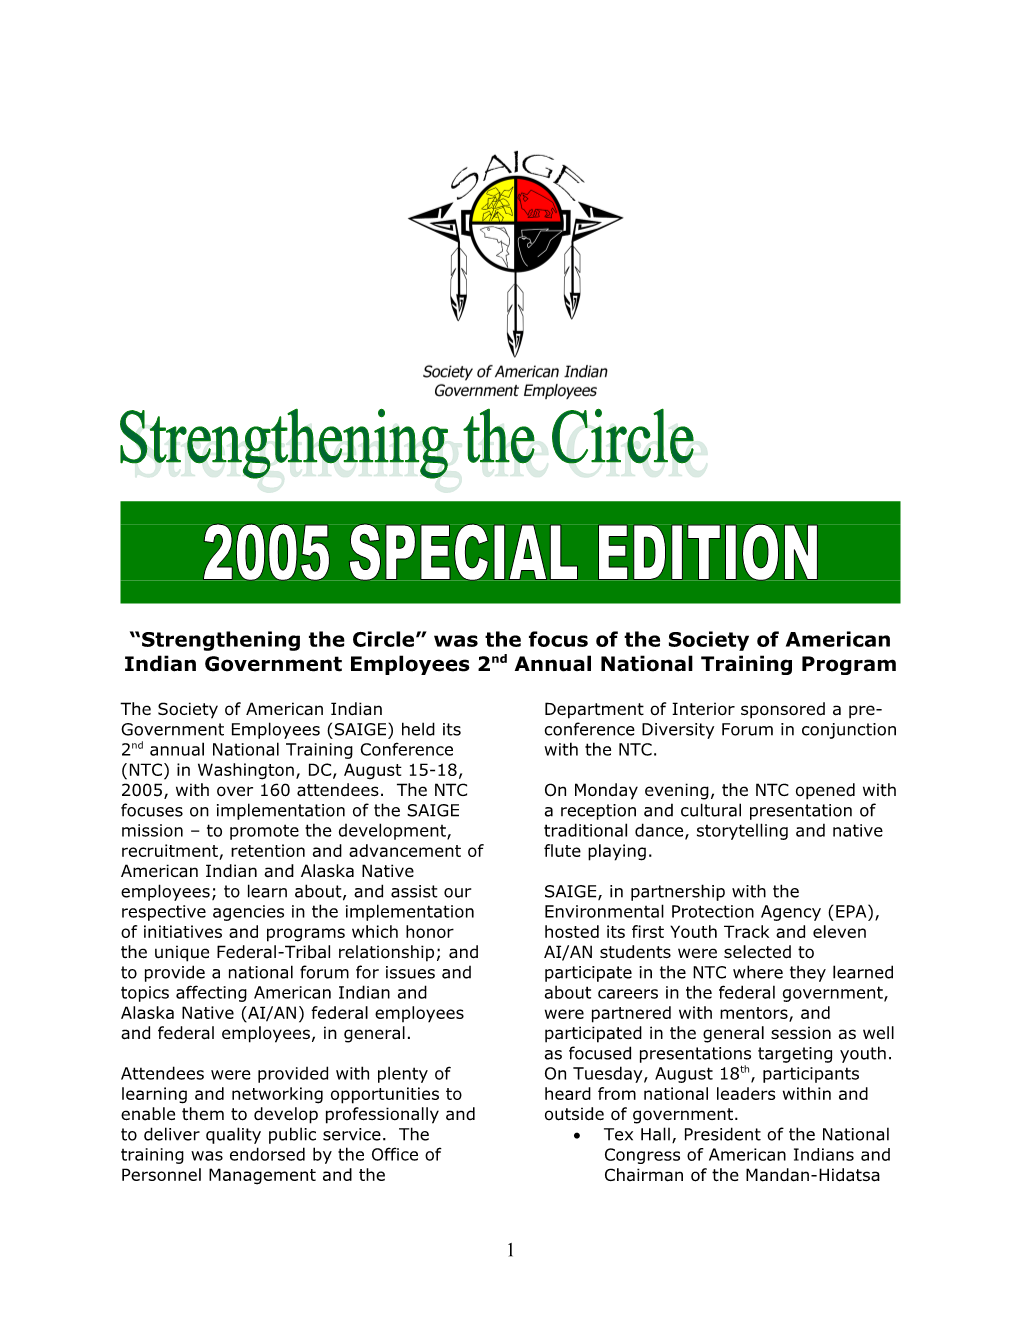 Strengthening the Circle Was the Focus of the Society of American Indian Government Employees